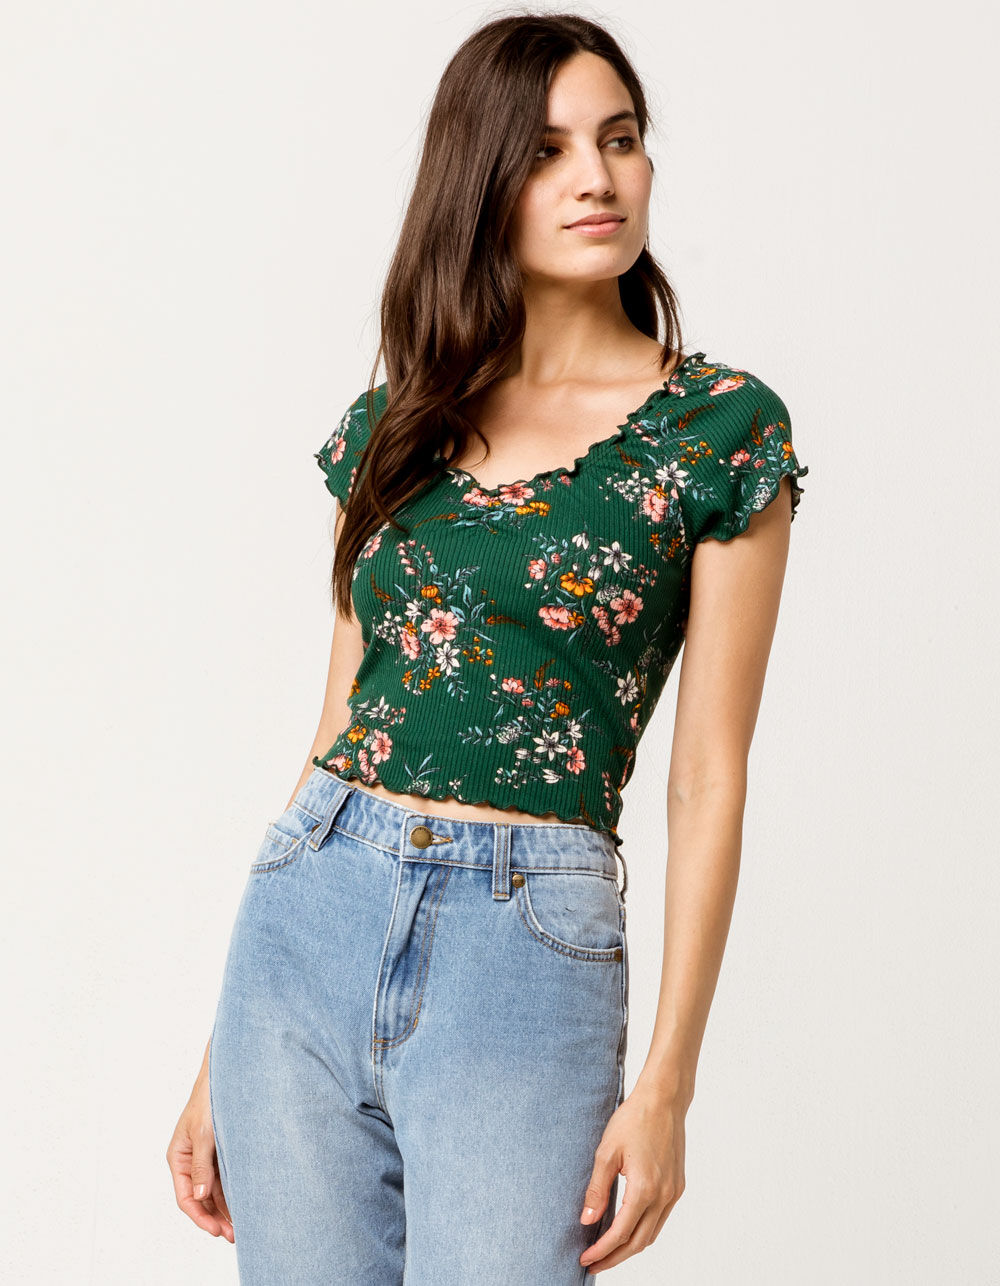 SKY AND SPARROW Floral Cinch Front Womens Crop Top - HUNTER | Tillys